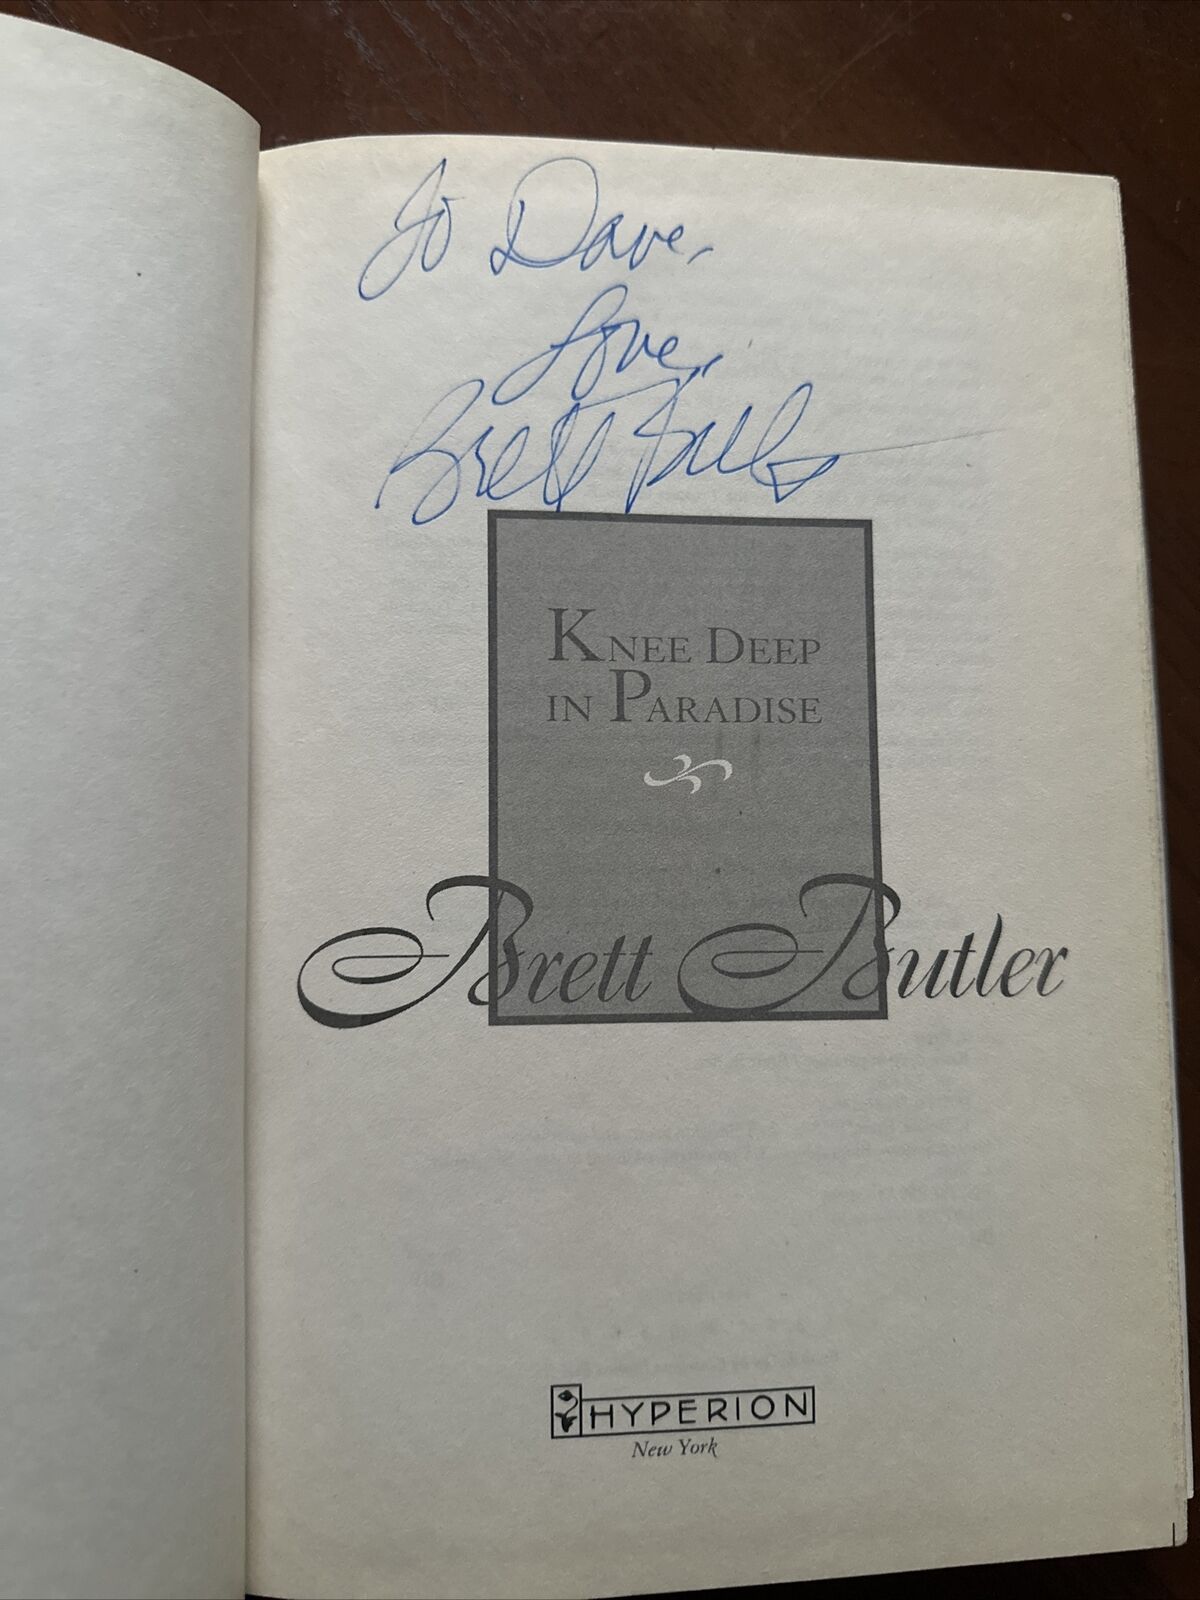 Knee Deep in Paradise -  Book by Brett Butler Autographed